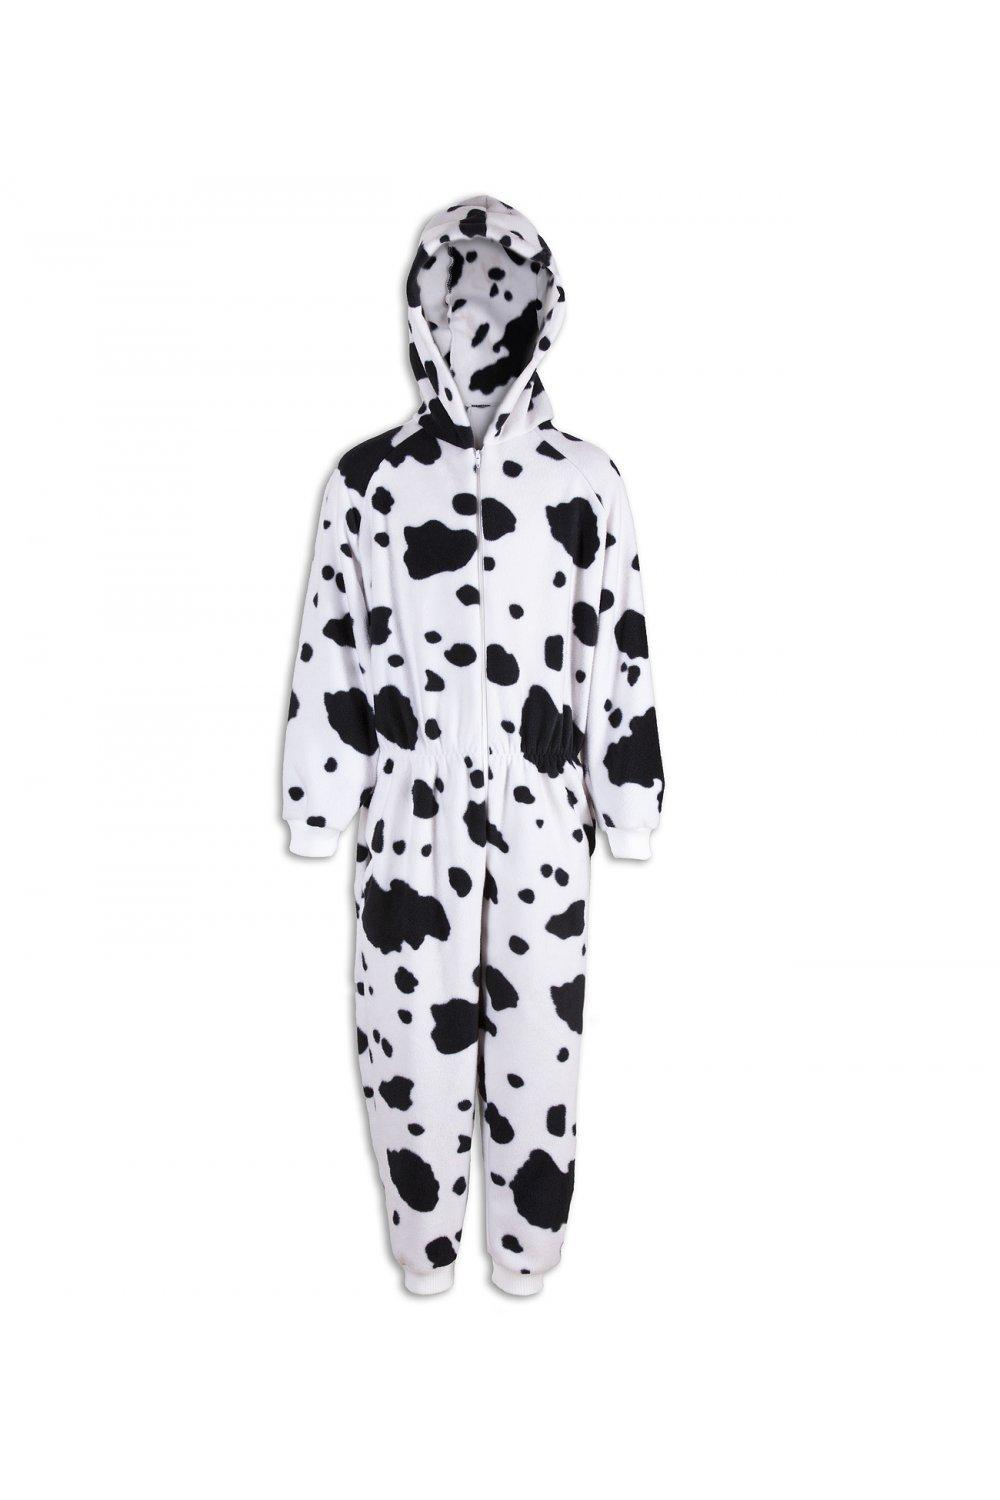 Supersoft Dalmatian Print Hooded All In One Onesie